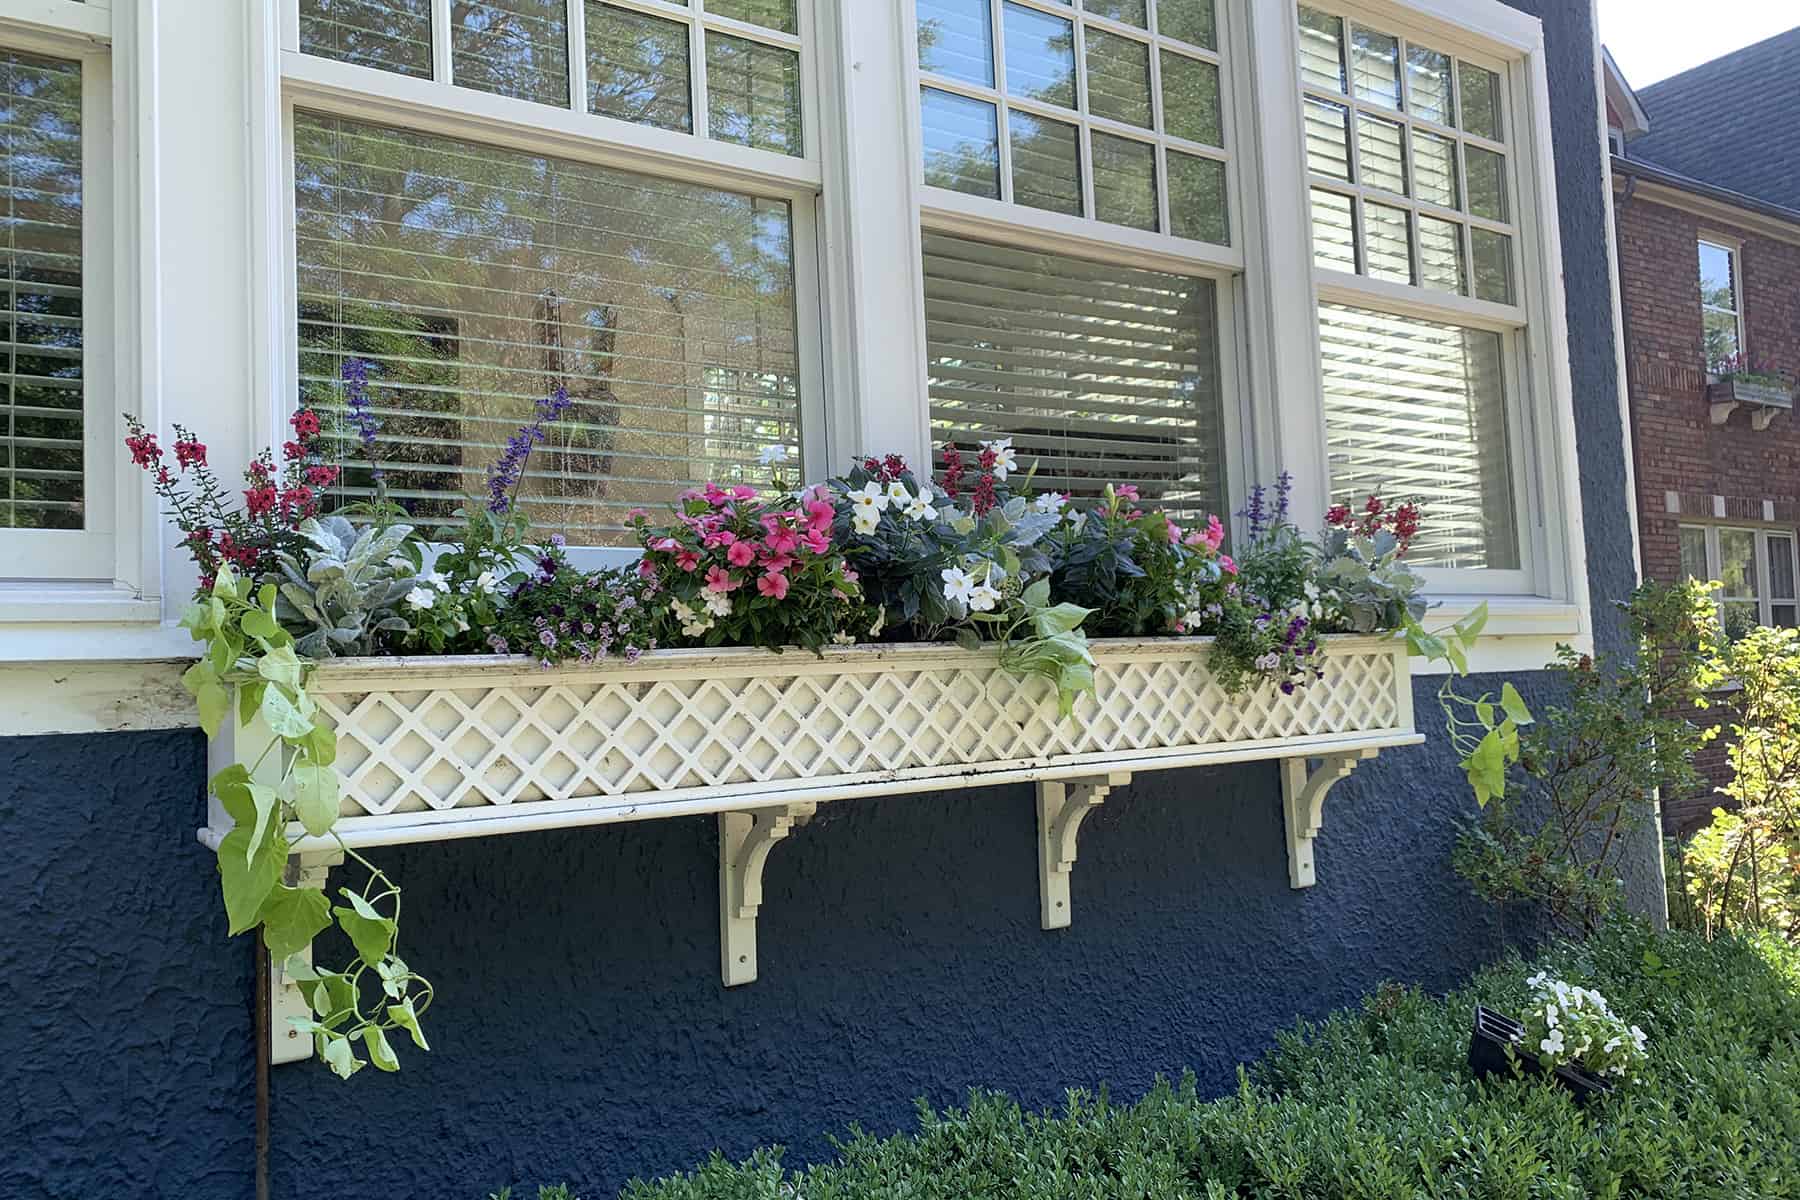 Lattice Flower Box Planted with Colorful Annuals